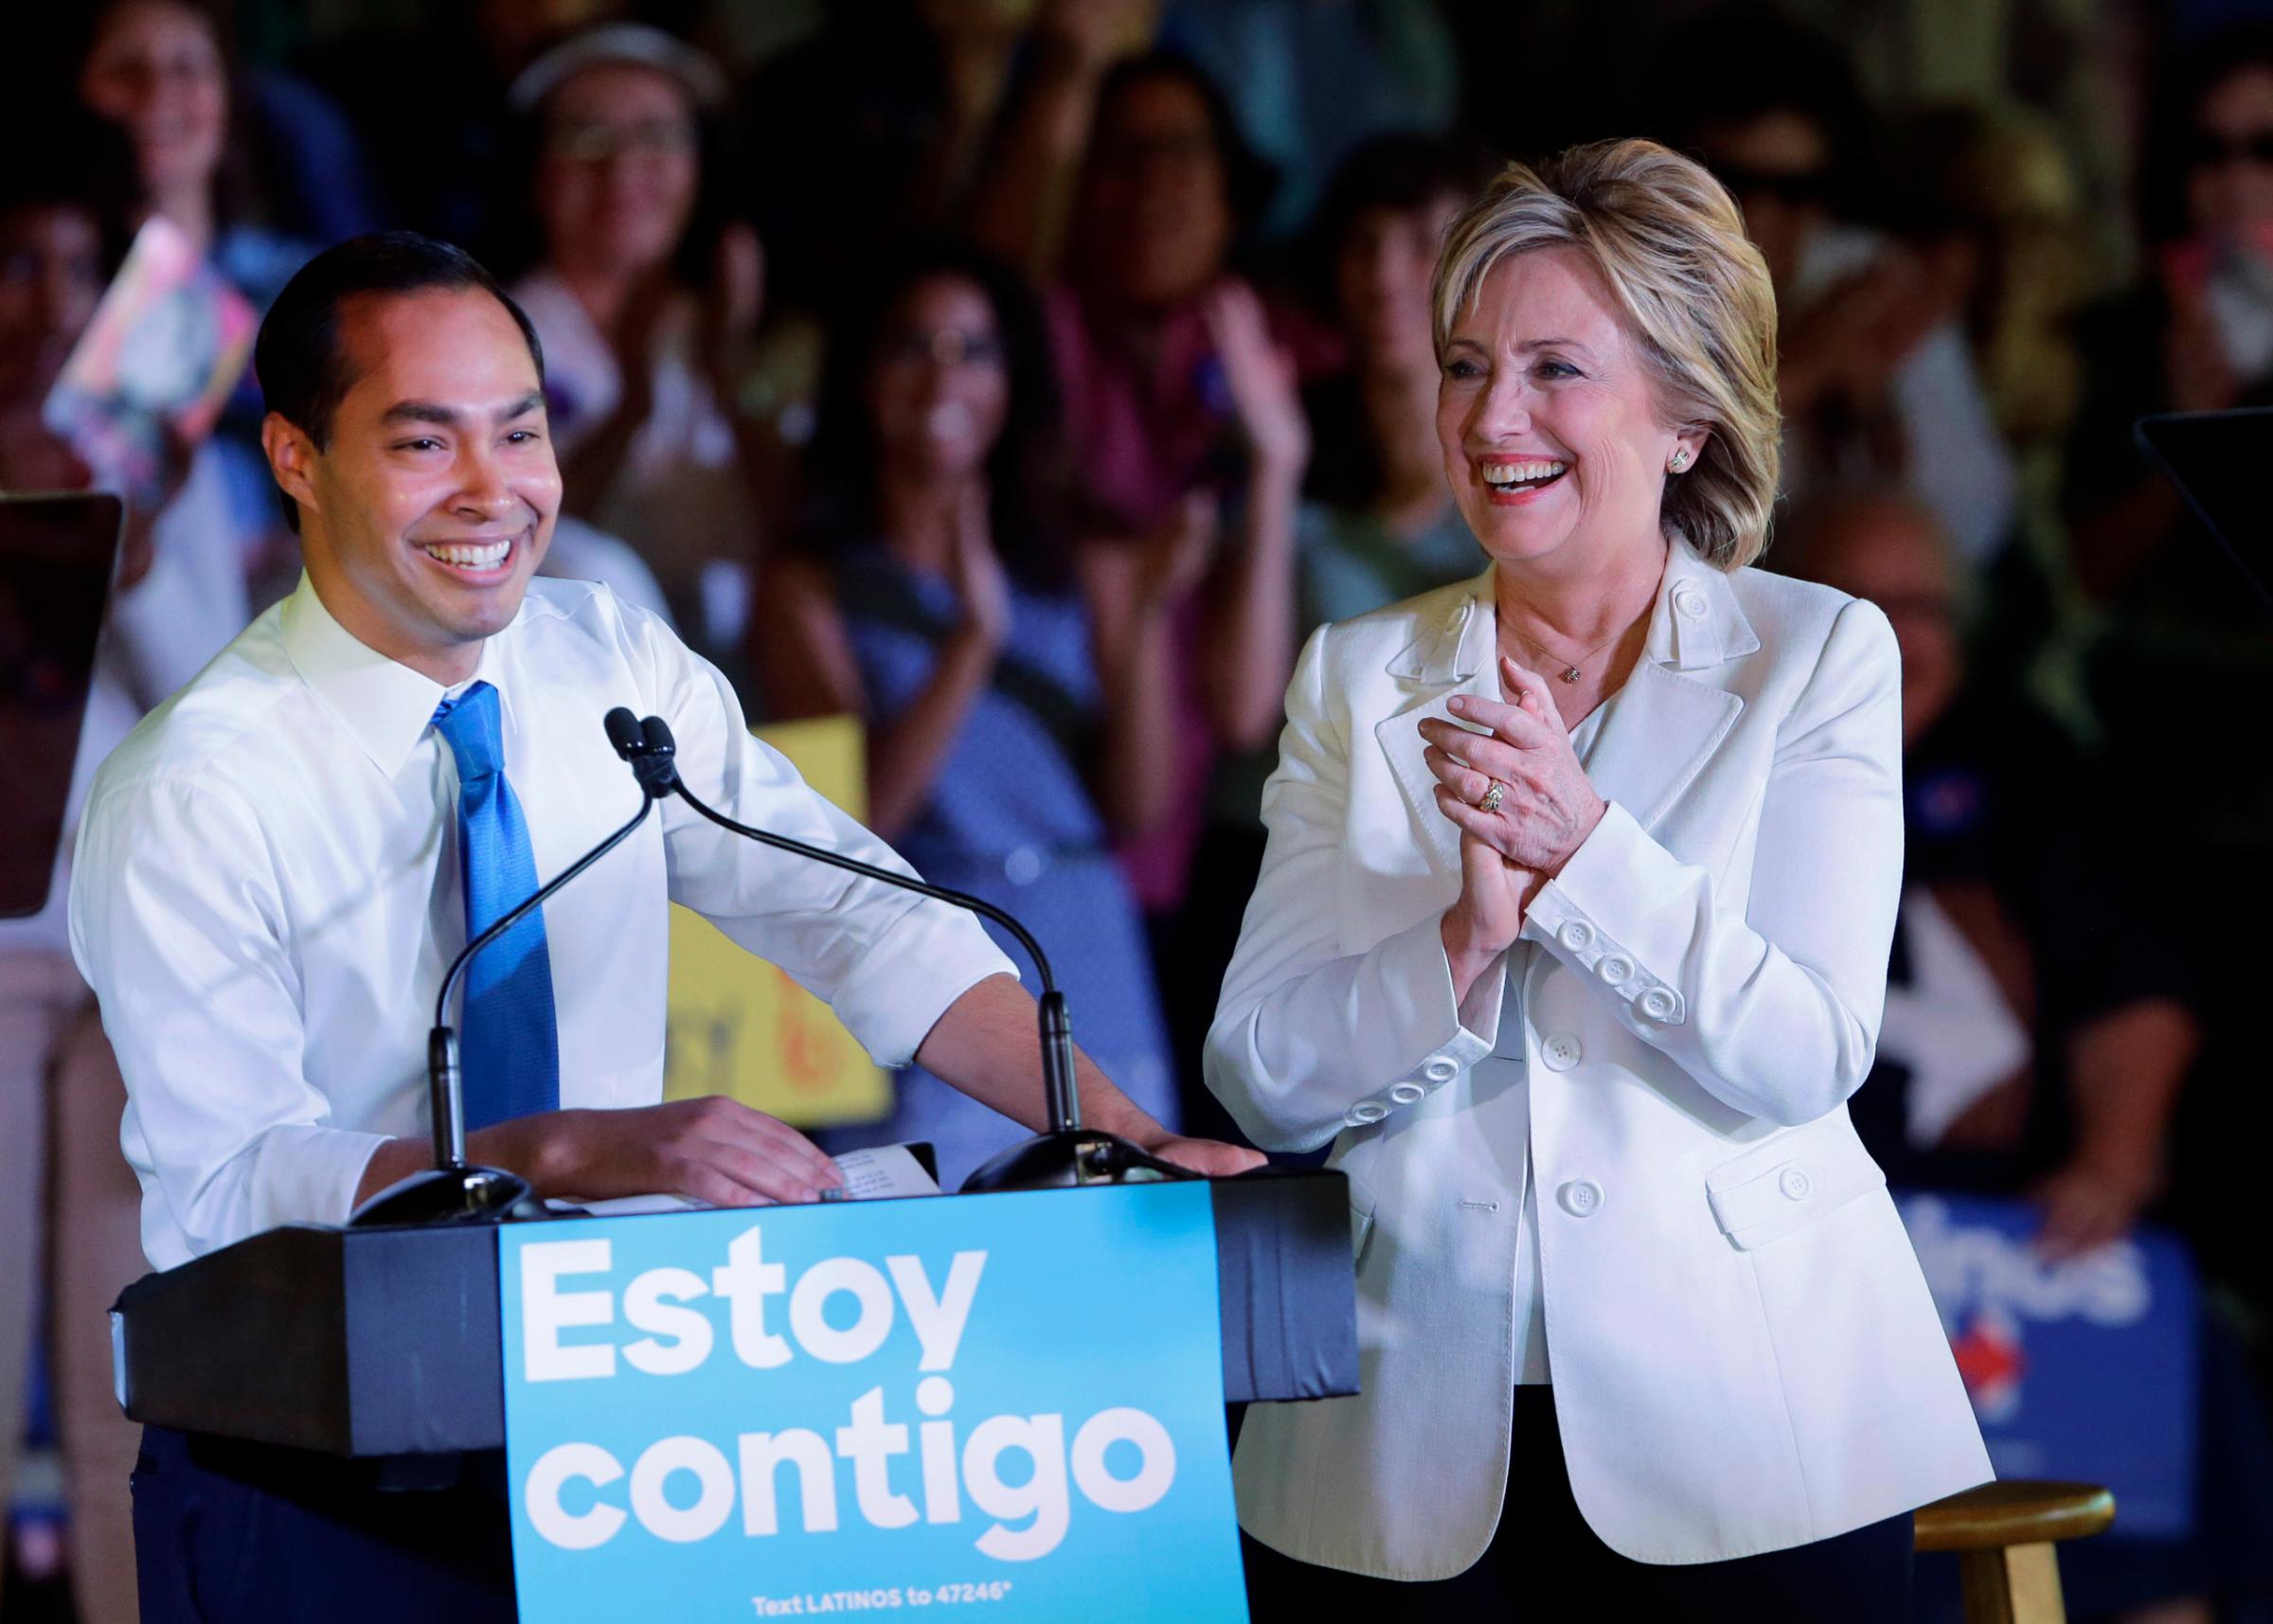 Democratic presidential candidate Hillary Rodham Clinton, right, with Housing and Urban Development Secretary Julian Castro, left, during a campaign event in San Antonio on Oct. 15, 2015.